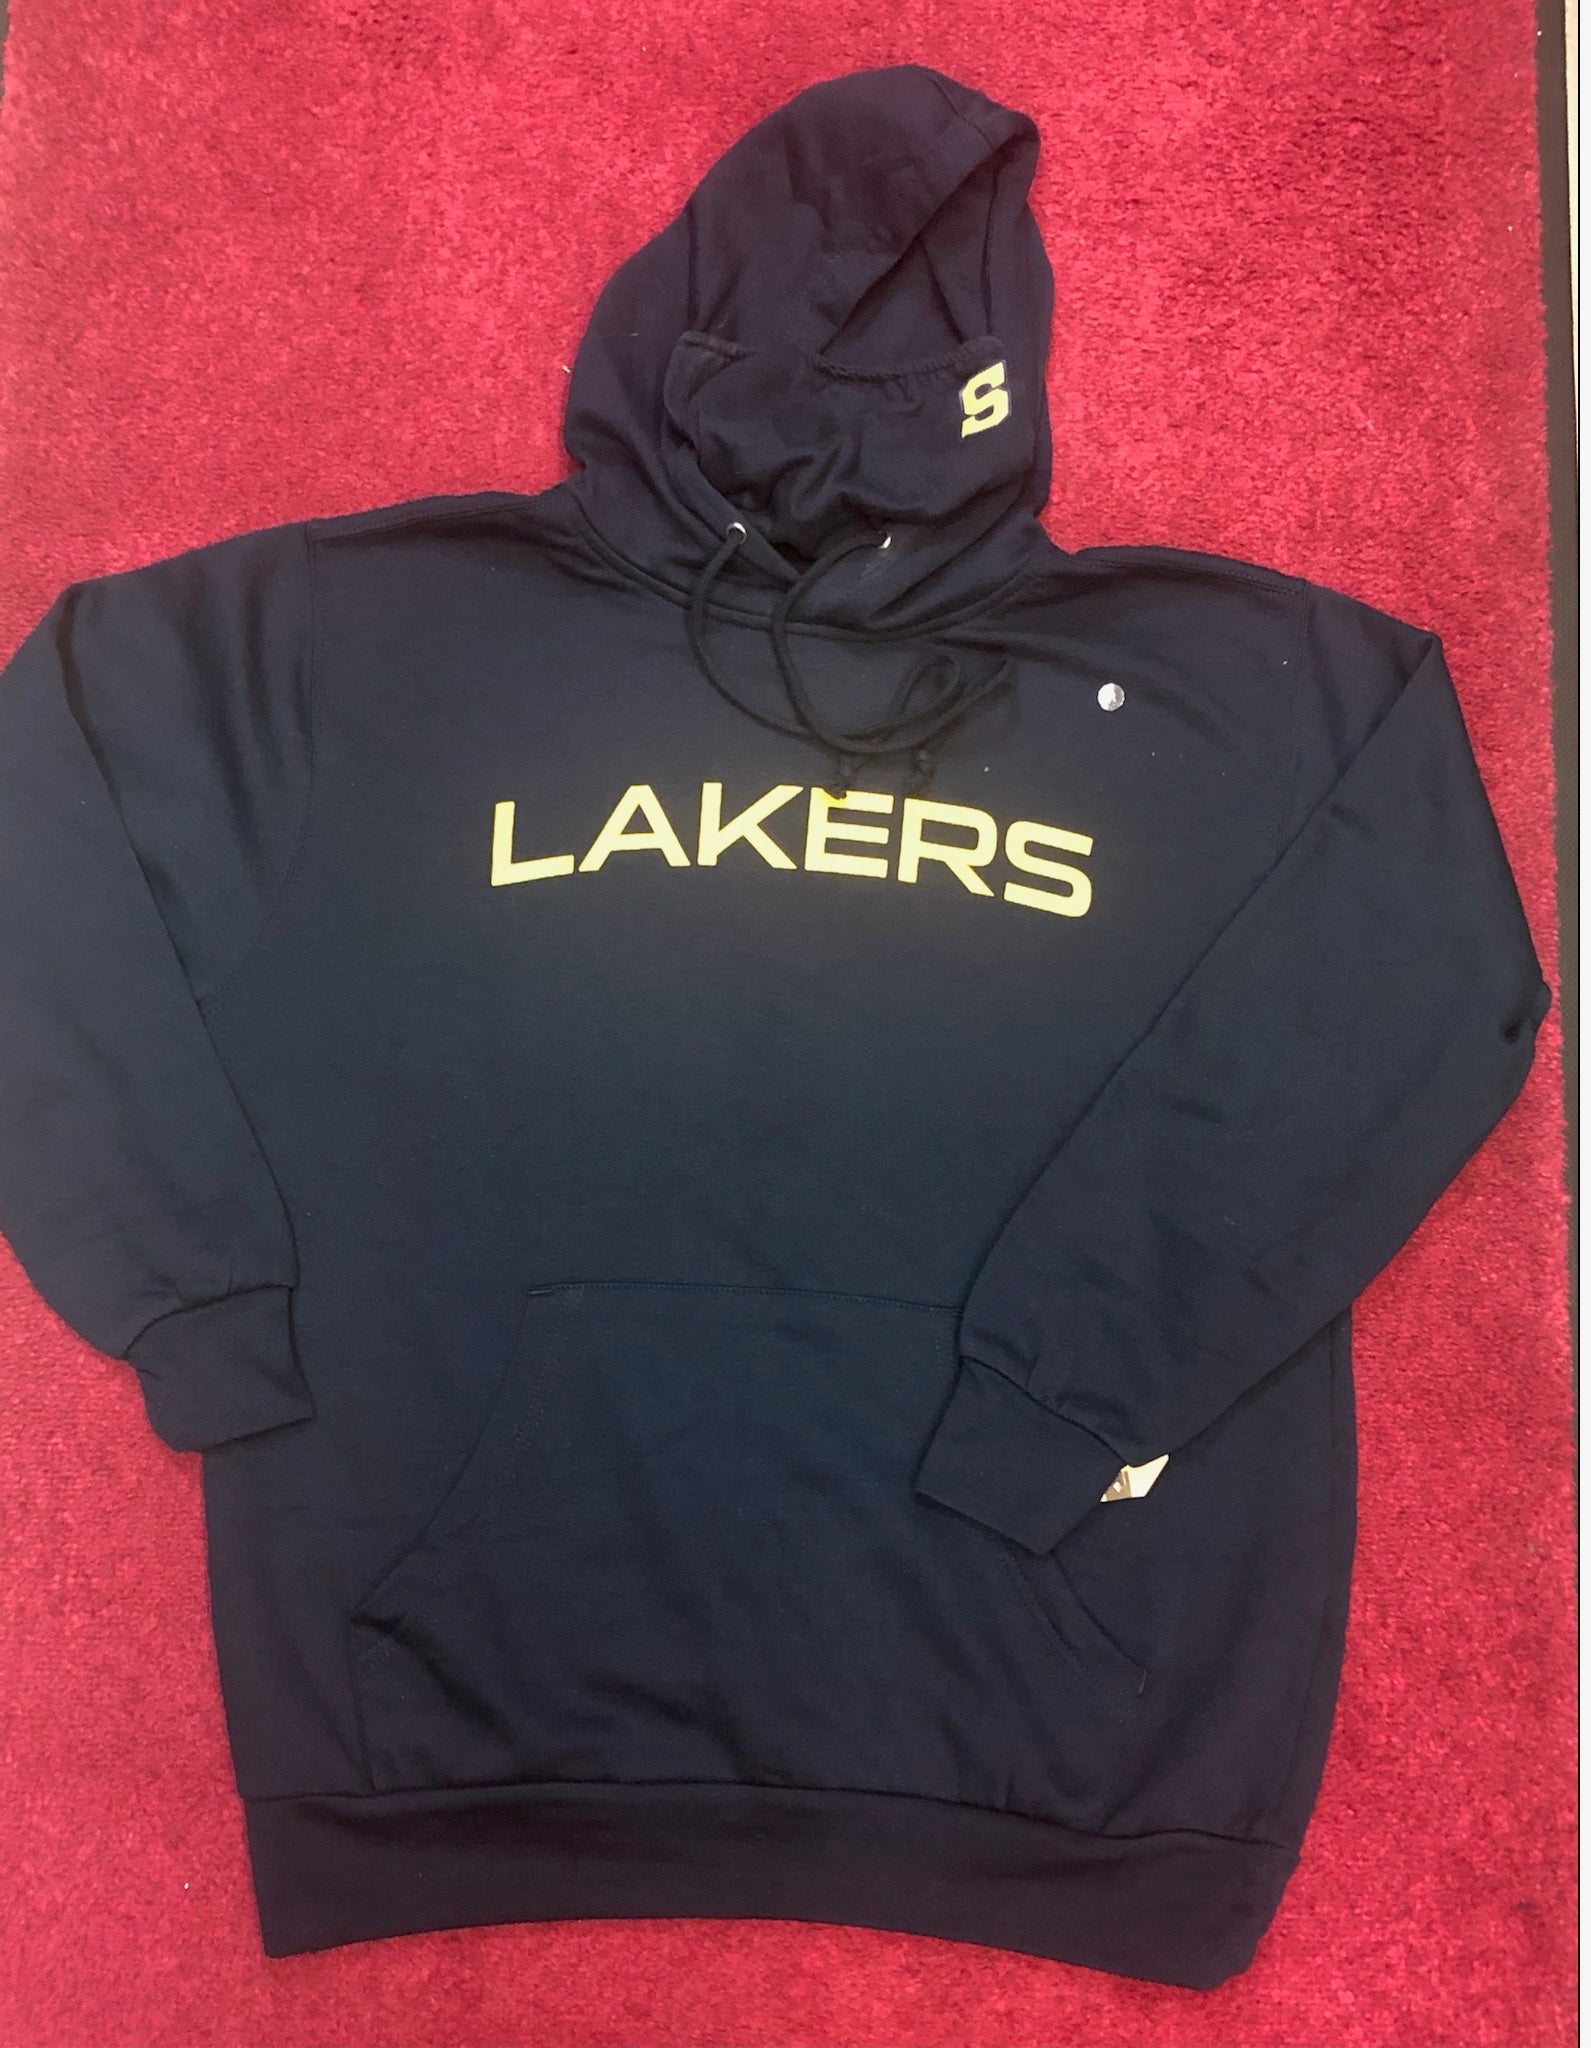 Lakers Pullover Hooded Sweatshirt w/Built in Mask - Roland's Men